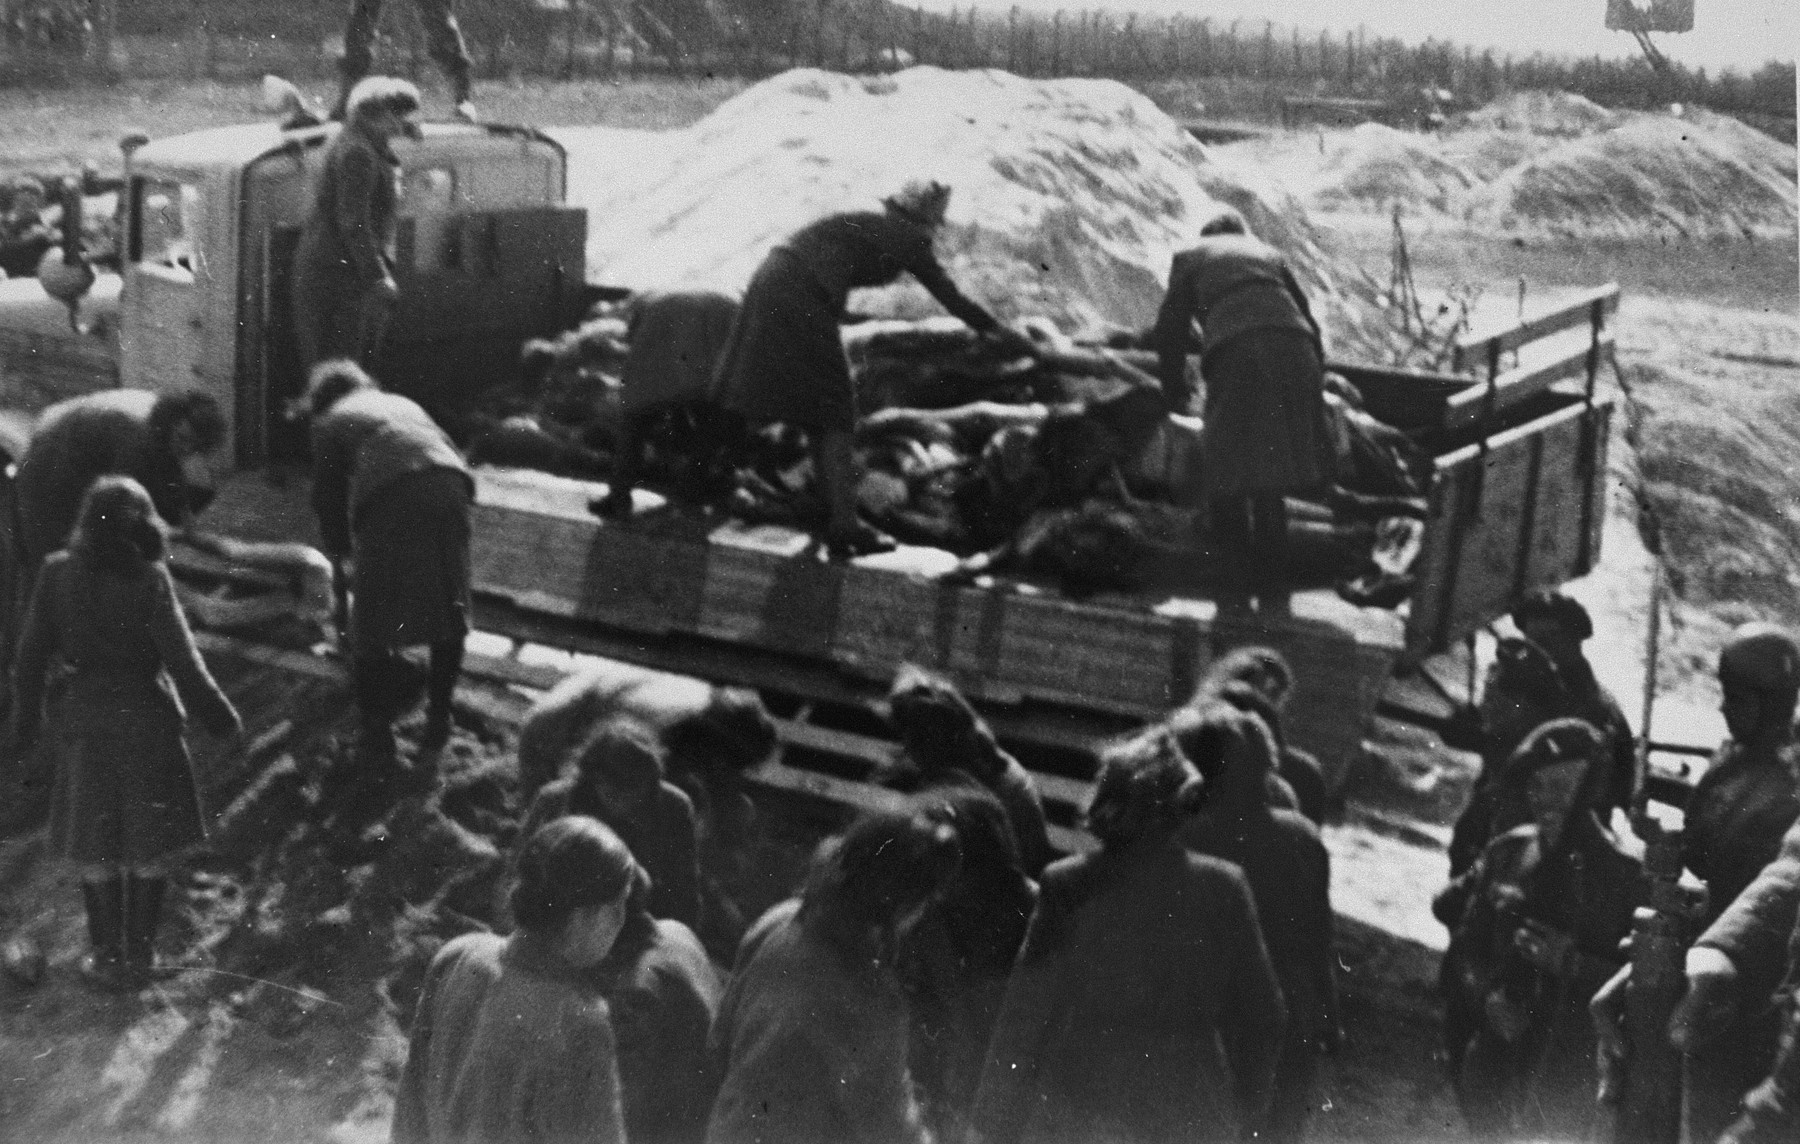 Former camp personnel unload a truckload of corpses into a mass grave.